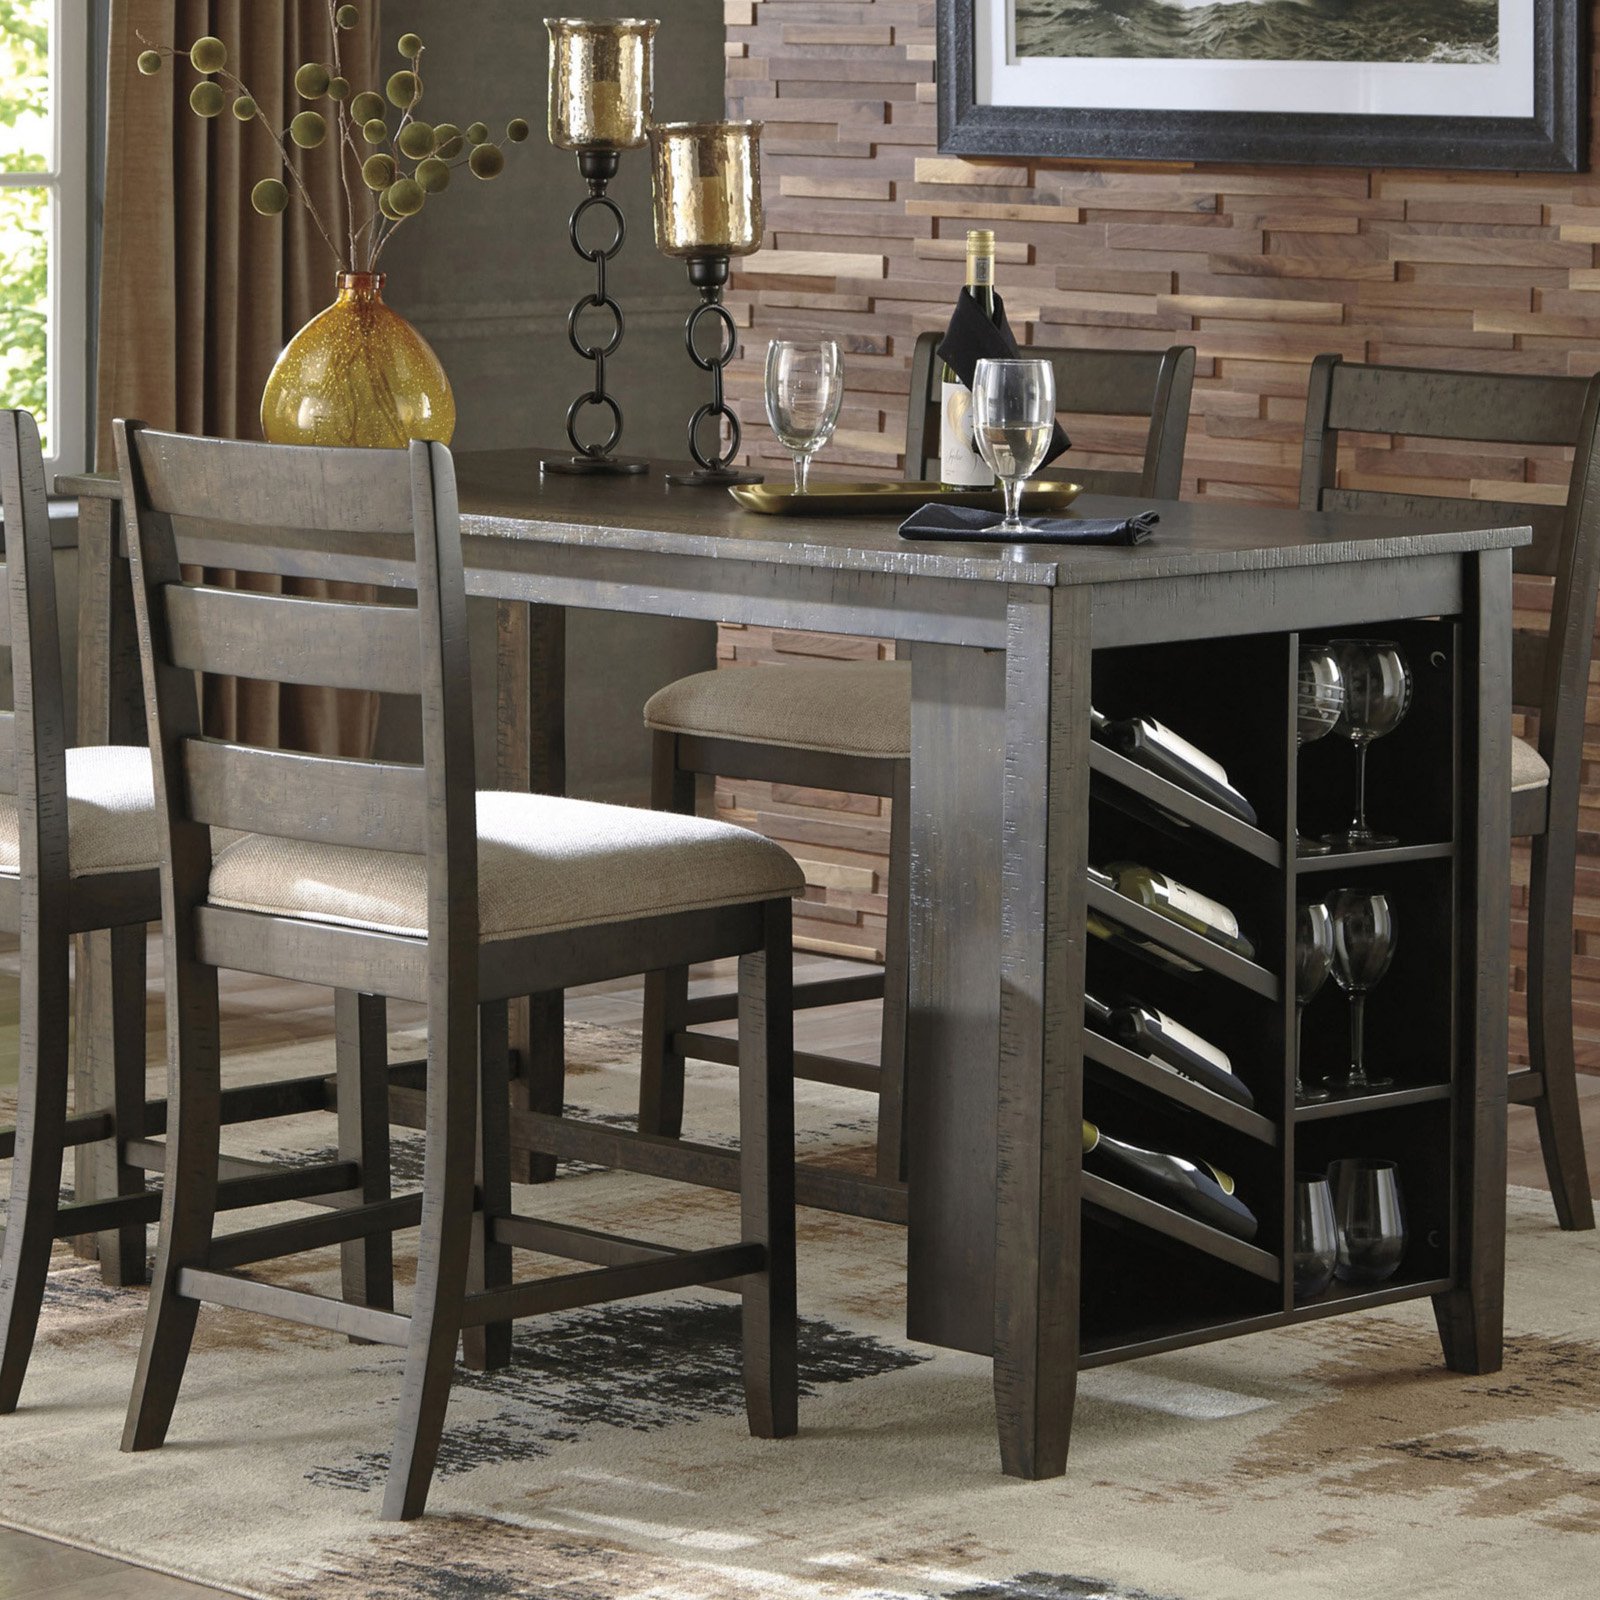 Signature Design by Ashley Rokane Counter Height Dining Table with